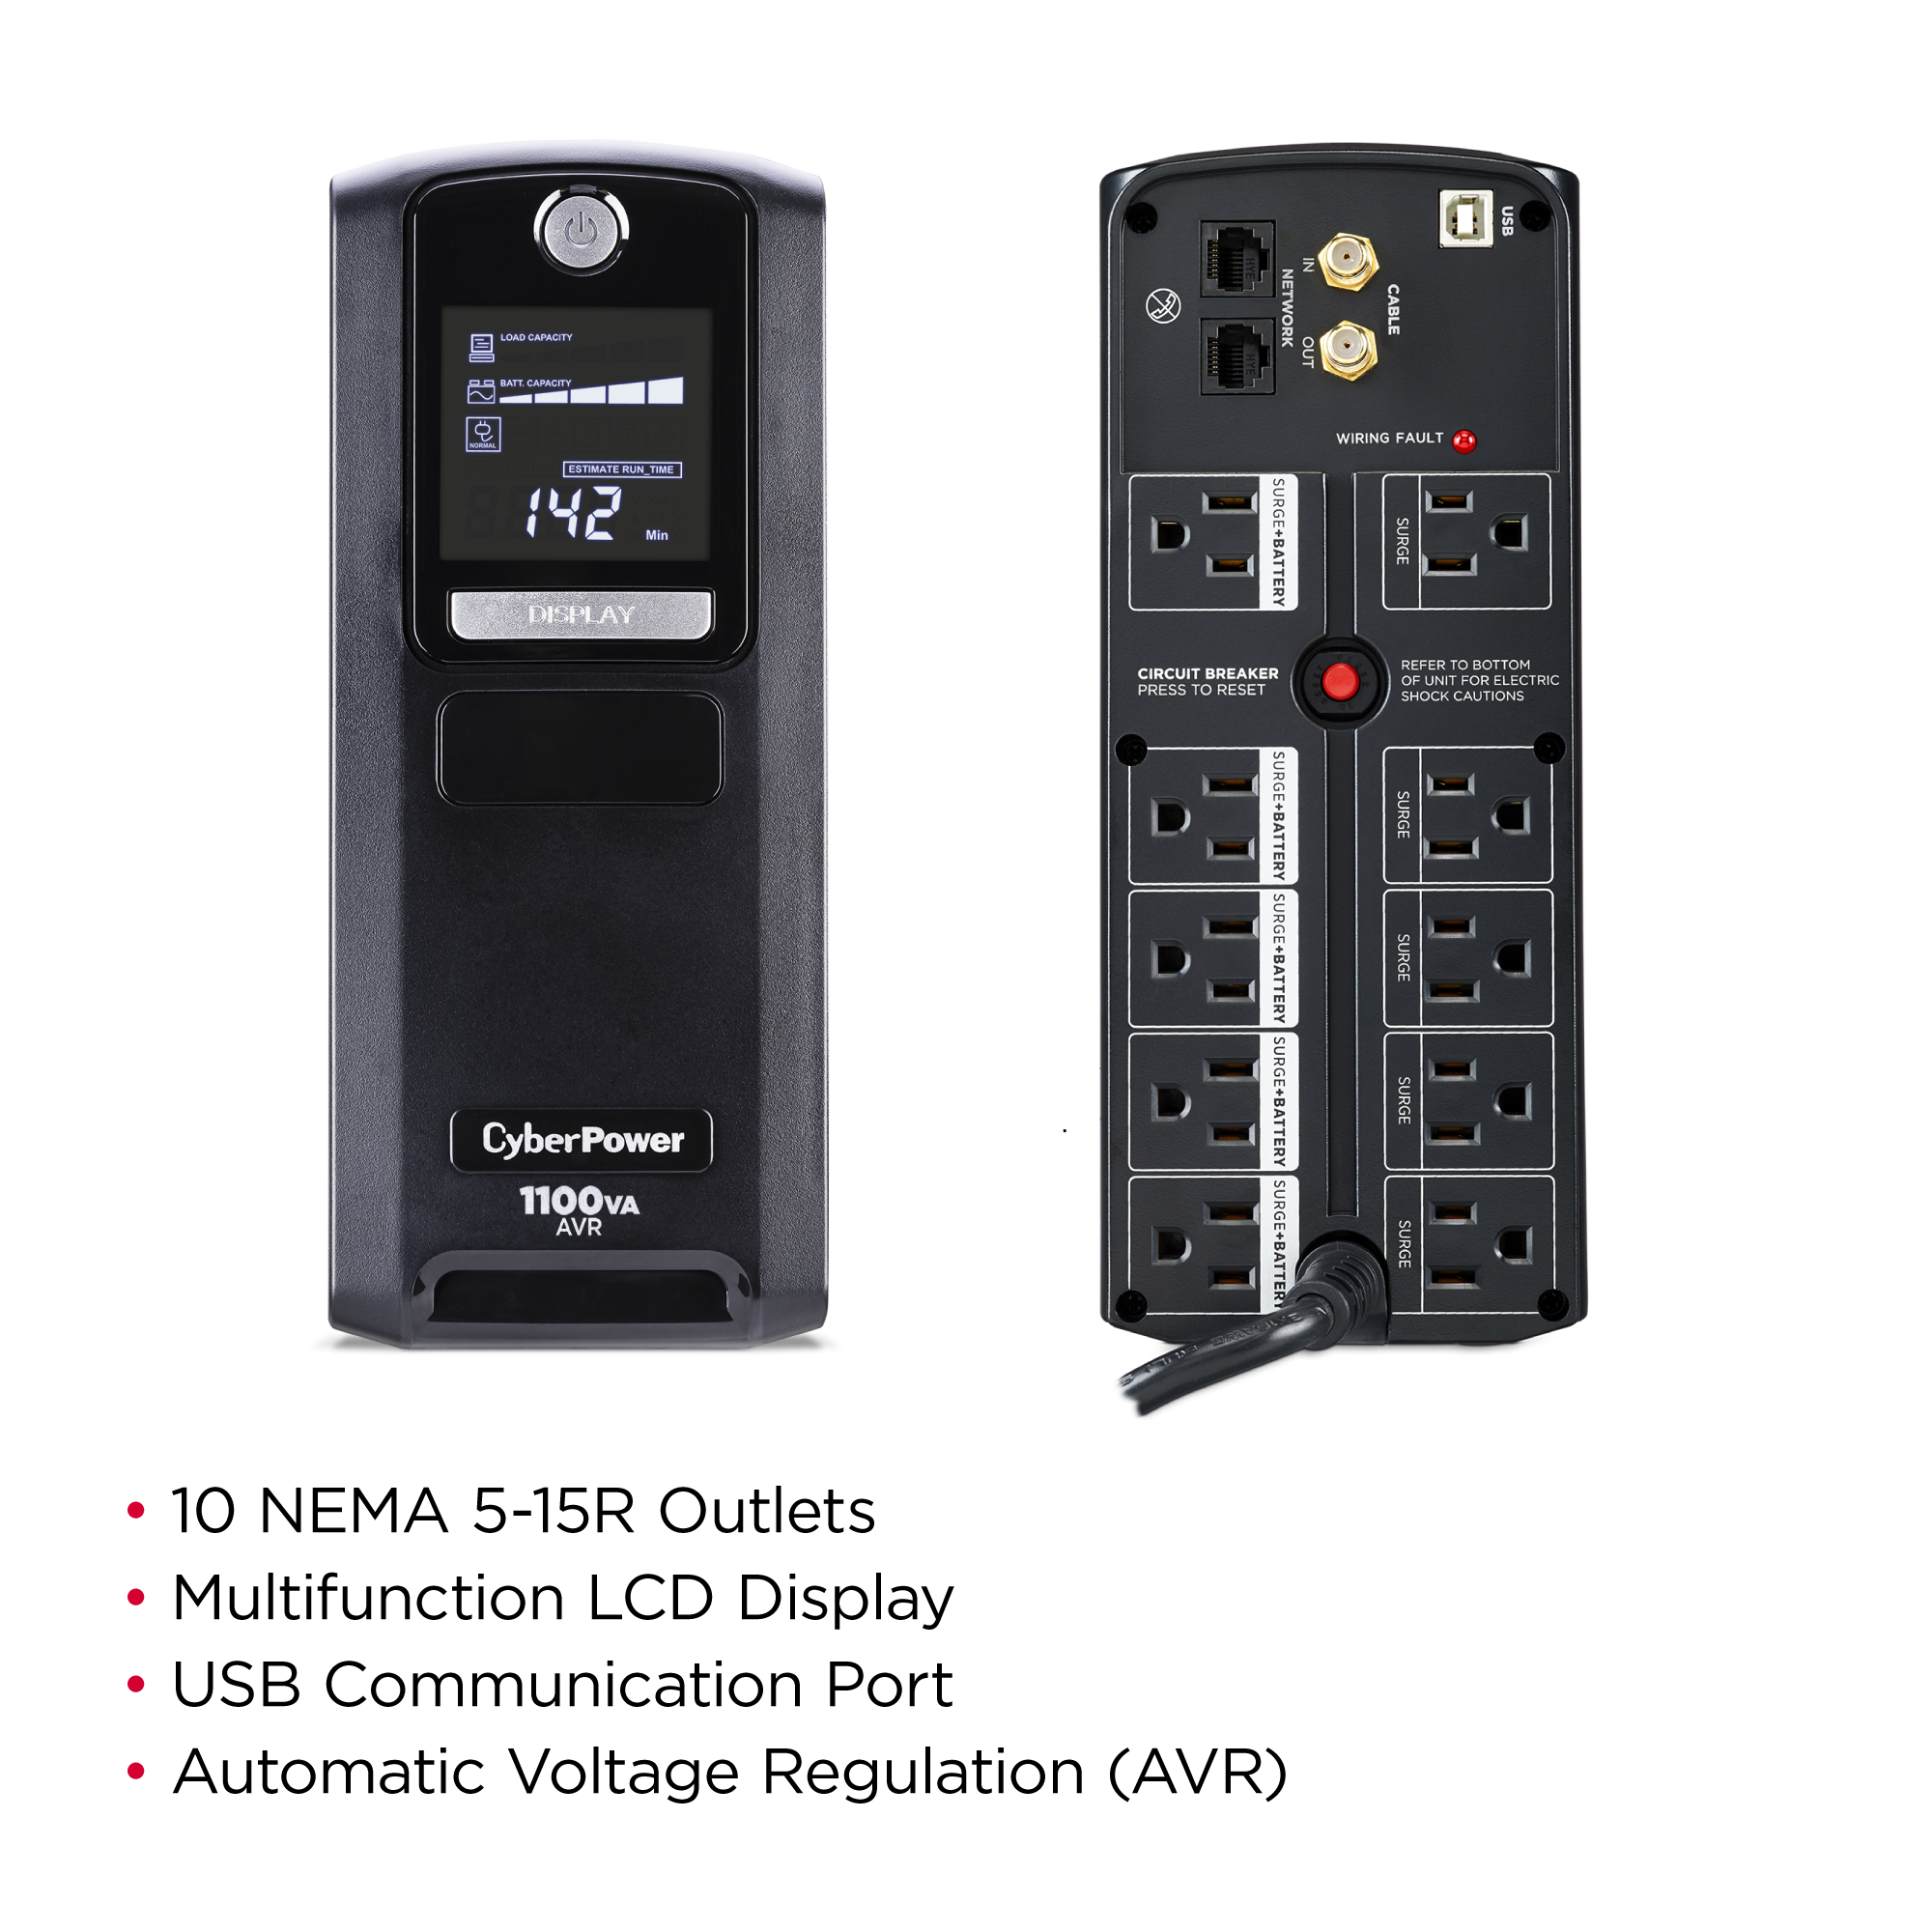 LX1100G Battery Backup Product Details, Specs, Downloads CyberPower